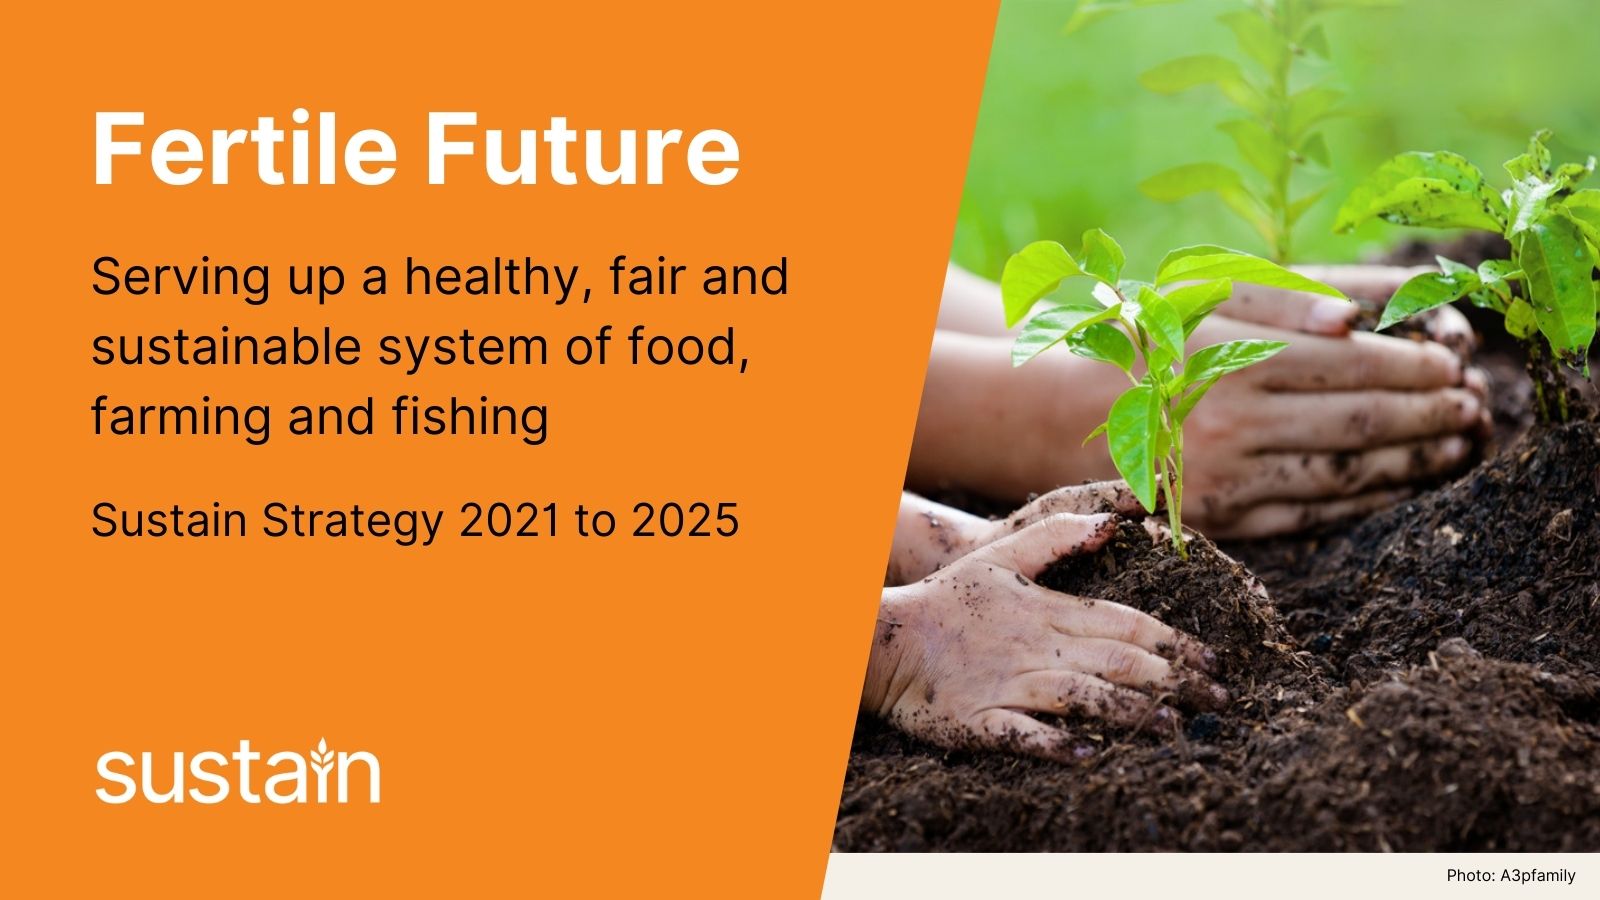 Fertile Future the Sustain alliance's strategy for 2021 to 2025 Sustain